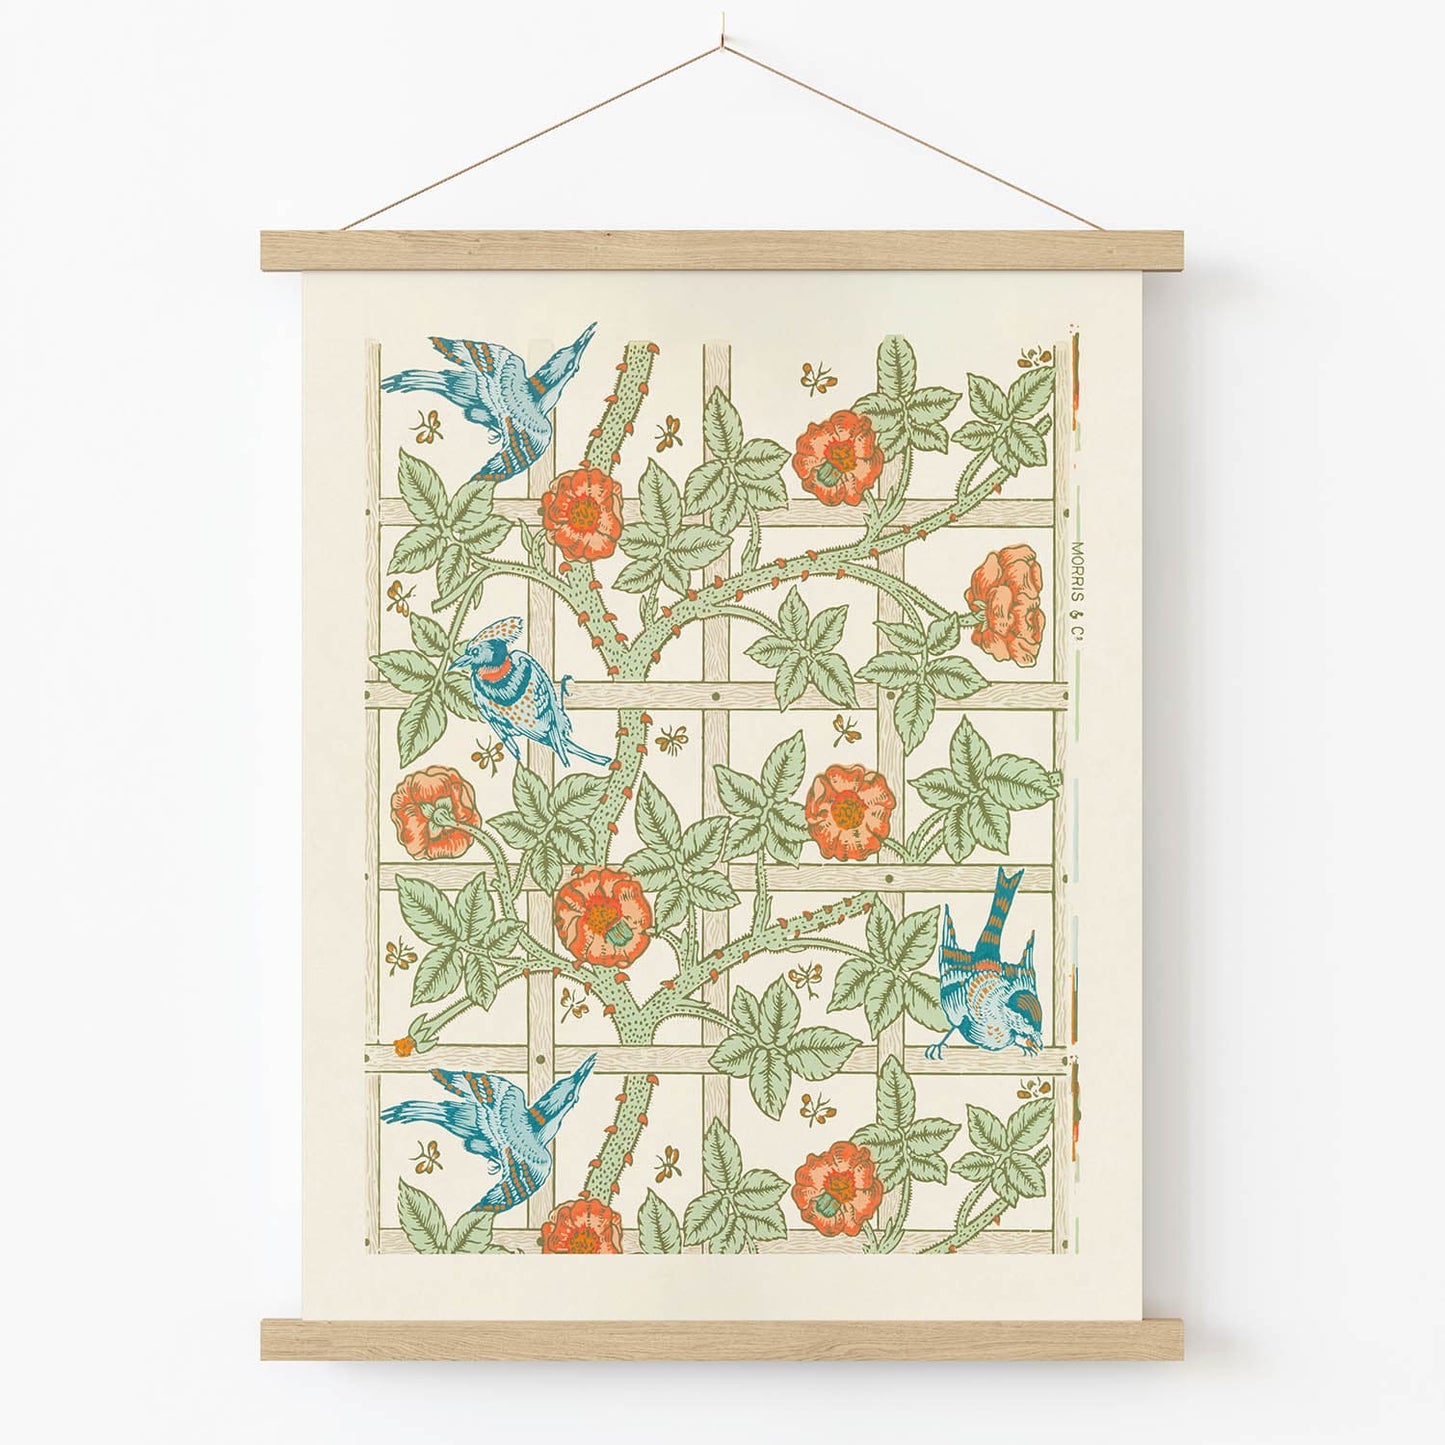 Plants and Birds Art Print in Wood Hanger Frame on Wall